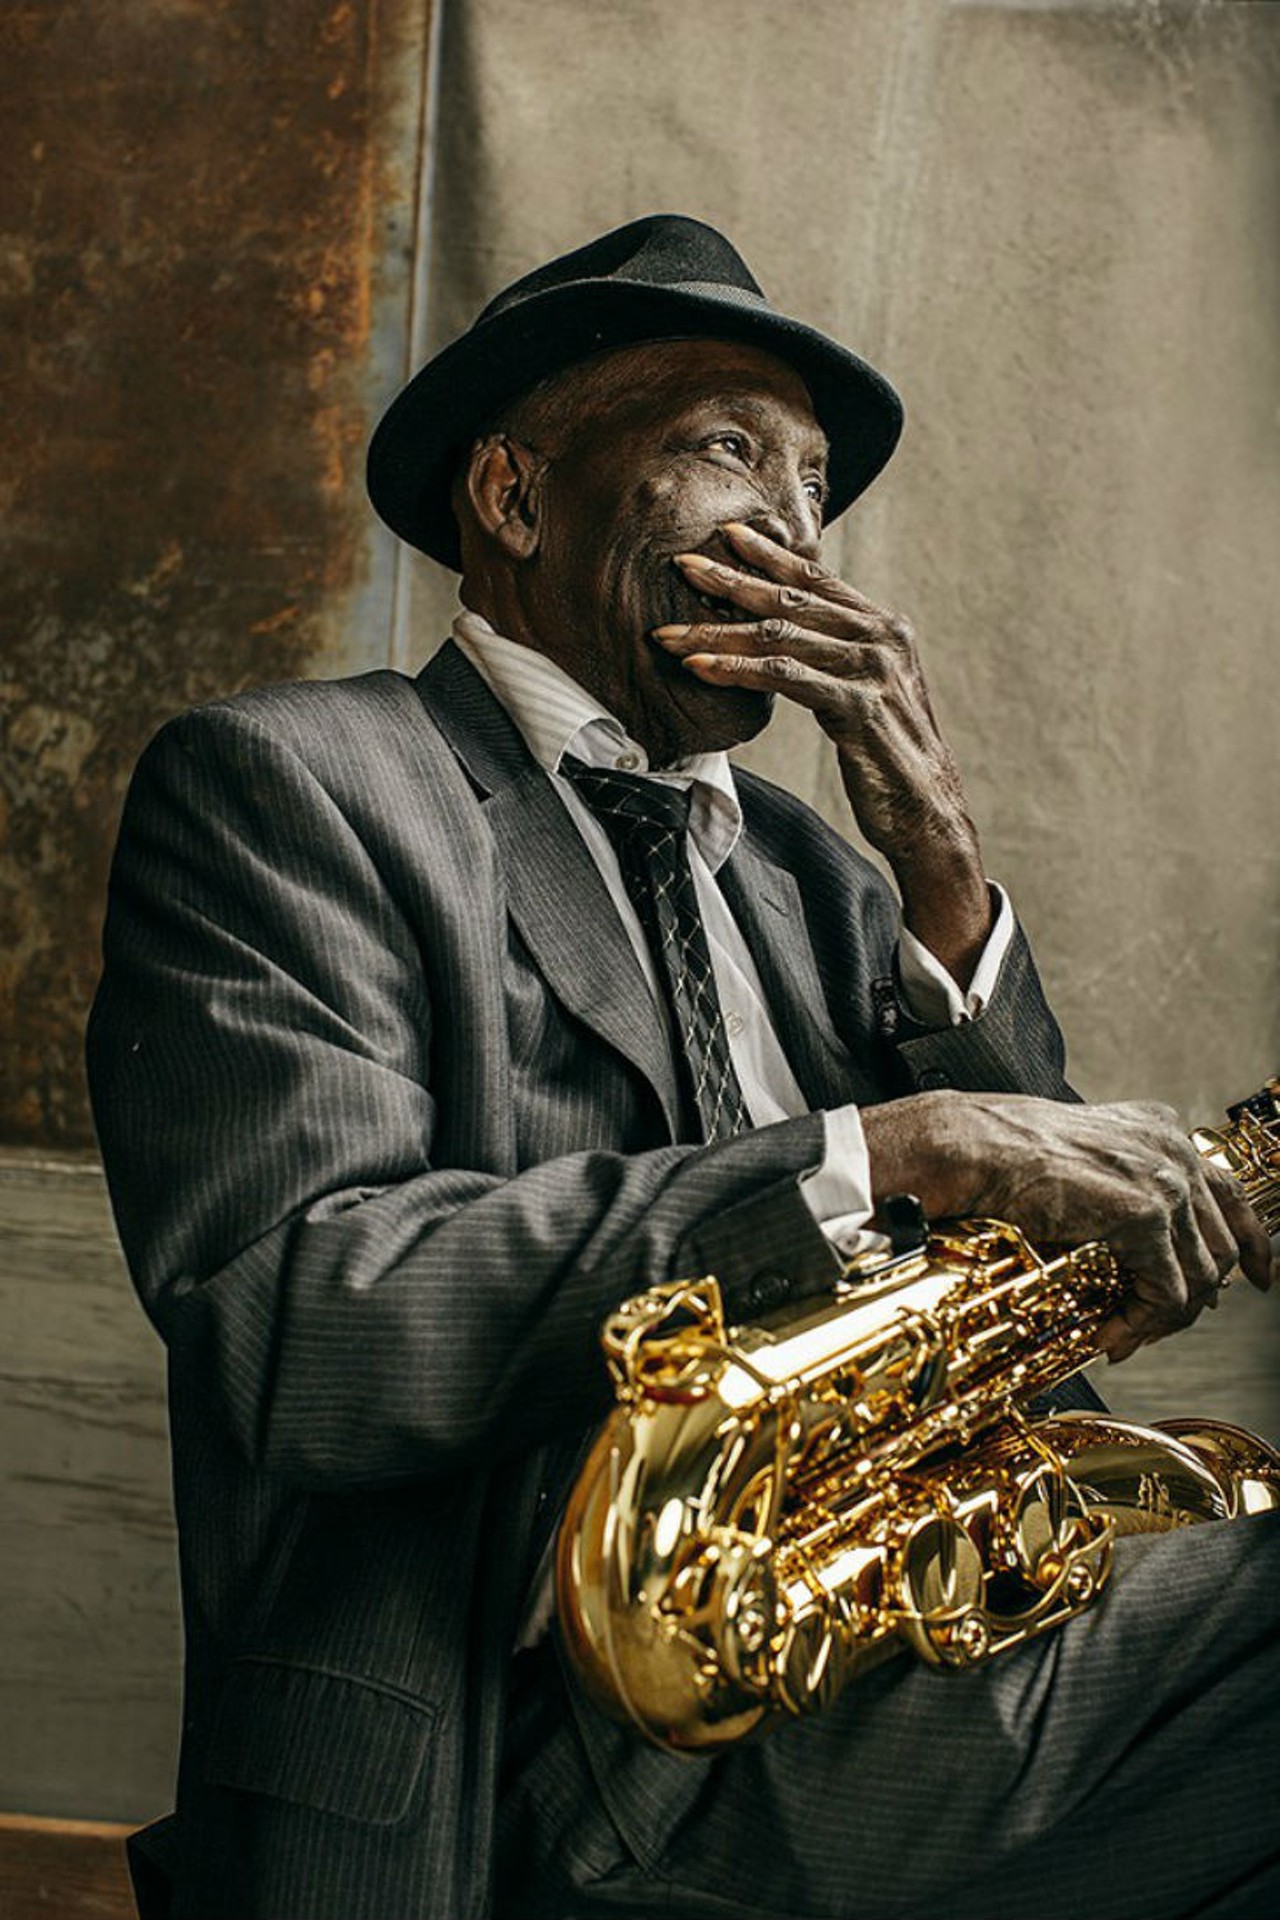 "Spot" Barnett
When Vernon "Spot" Barnett died in 2019, San Antonio lost a bonafide music legend. The saxophonist was a key figure in the city's blues and jazz scenes and even helped pioneer its homegrown Westside Sound. The beloved horn man's resume also included stints with artists including Bobby "Blue" Bland and Ike and Tina Turner.
Courtesy Photo / Josh Huskin